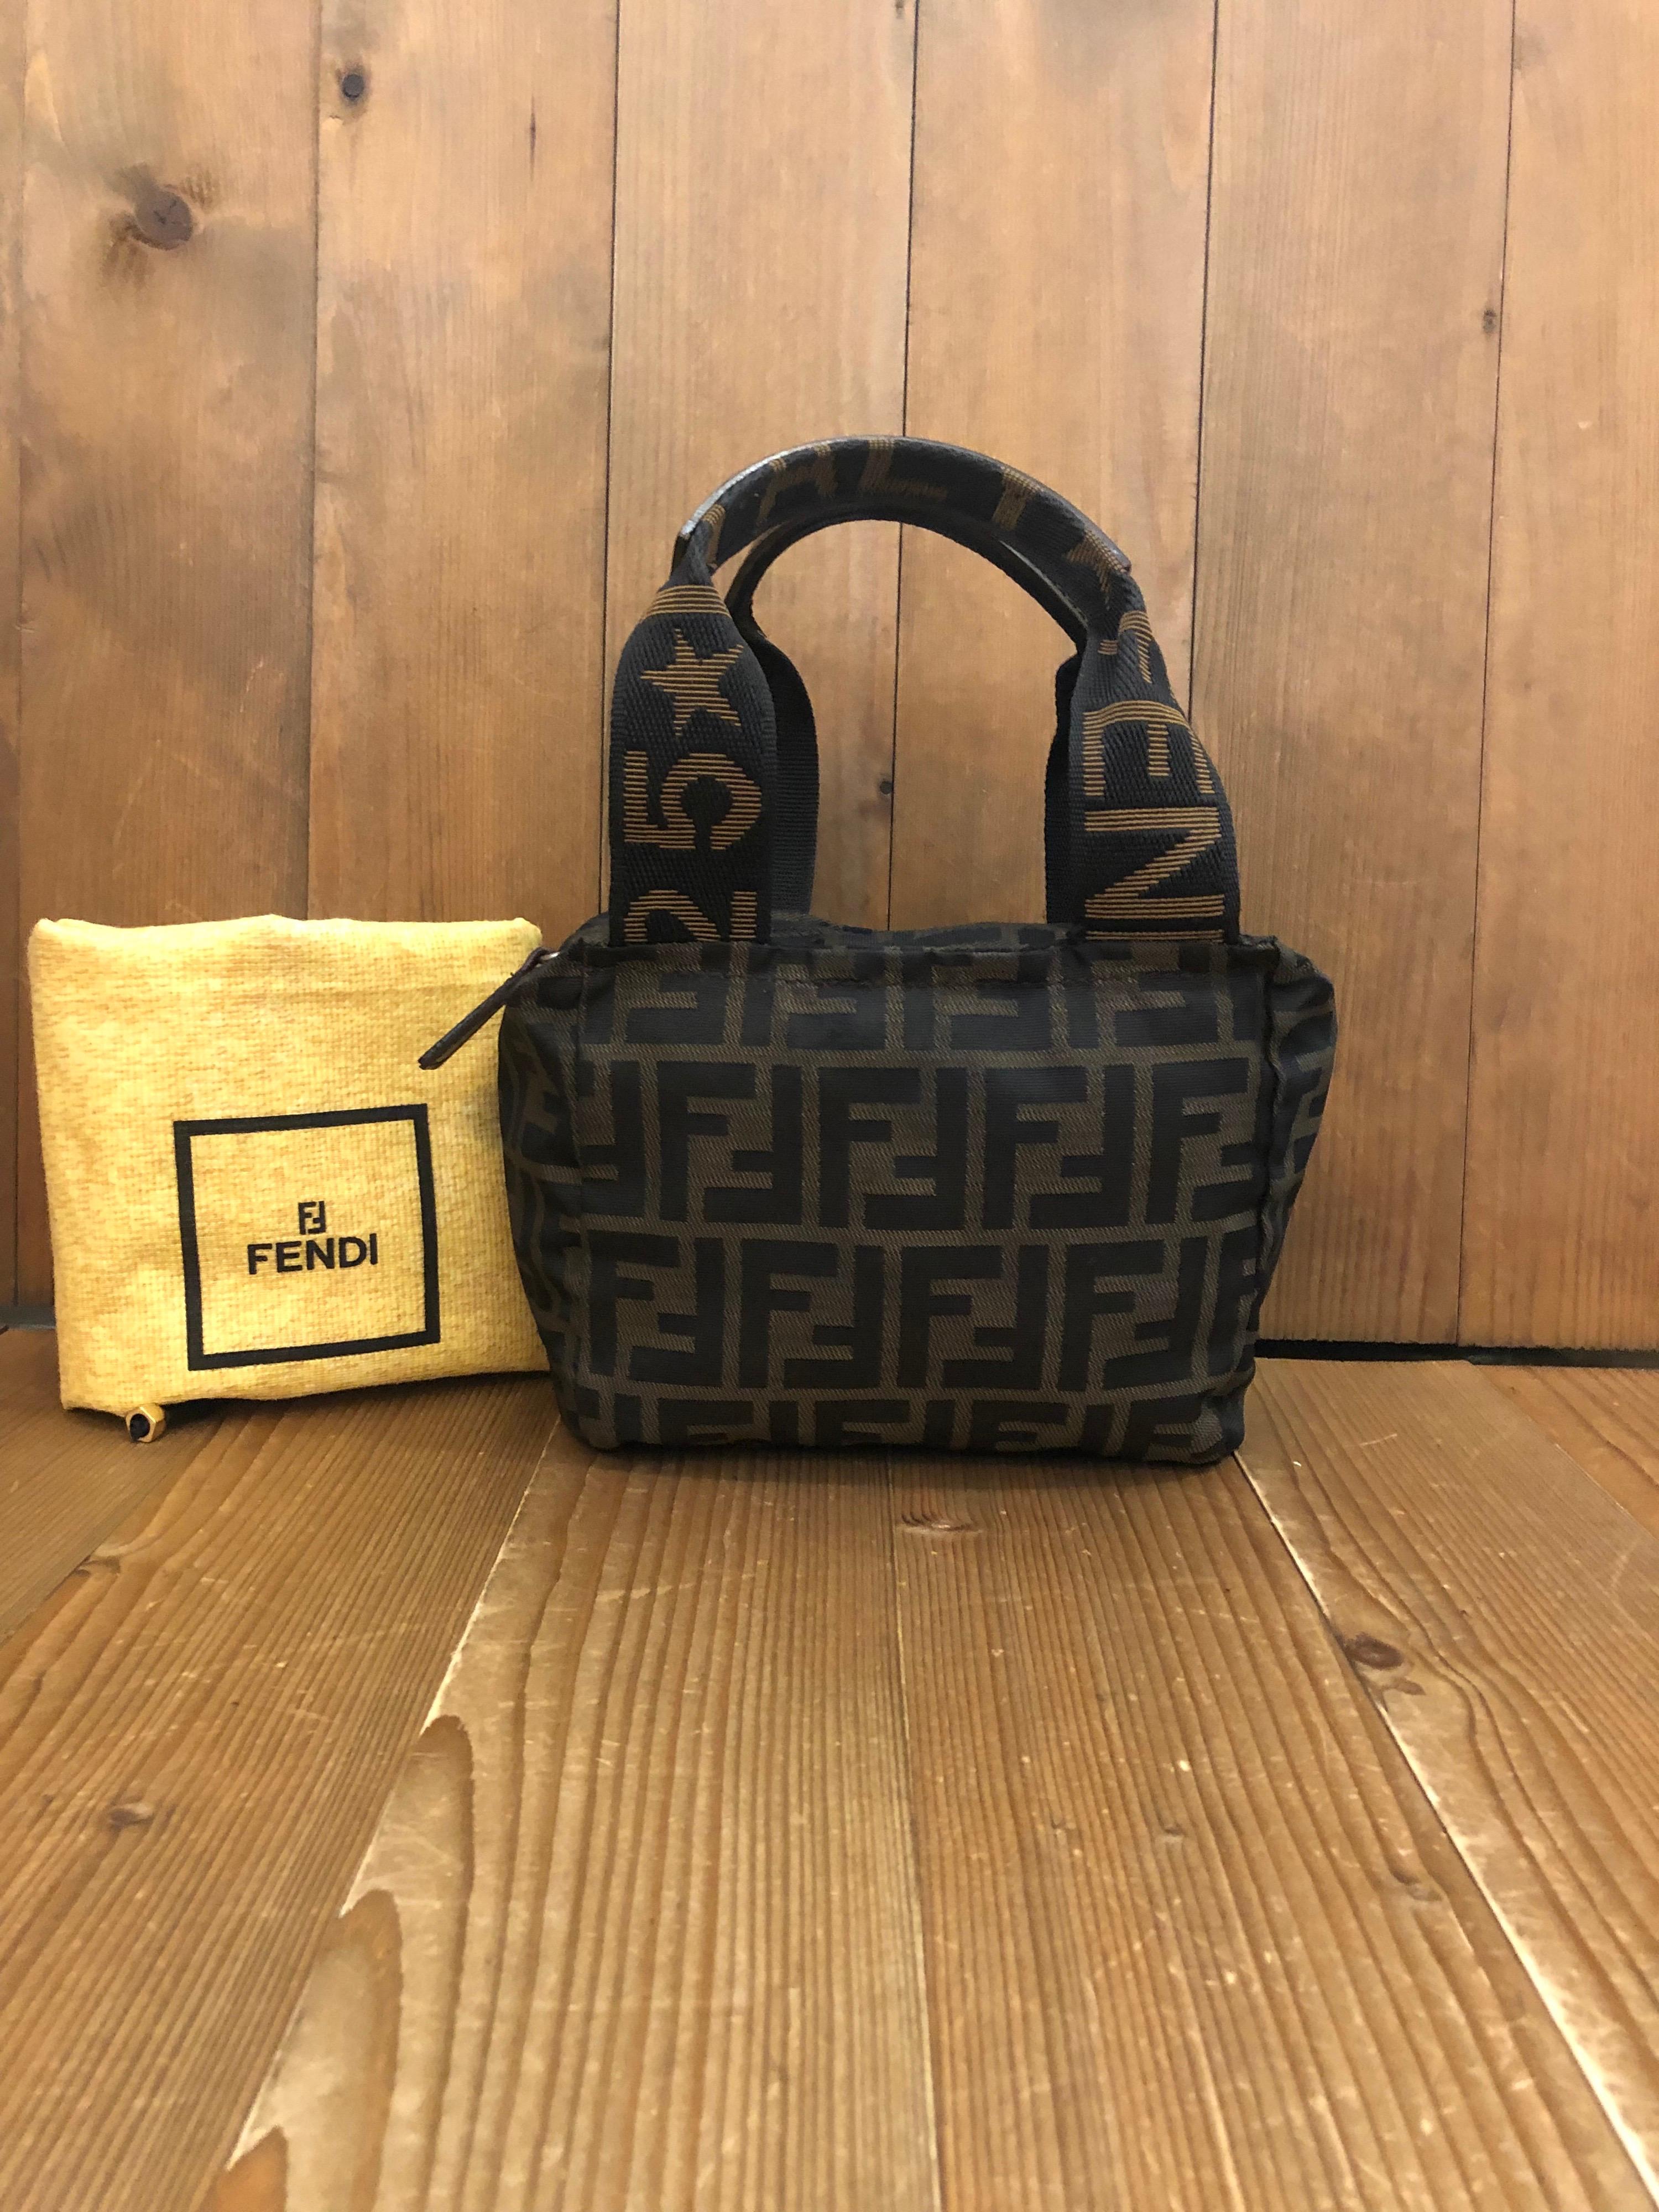 Vintage Fendi mini handbag in Fendi's iconi Zucca  jacquard featuring leather trimmed handles. Made in Italy. Measures 7 x 5.75 x 3.5 inches Handle Drop 4 inches (fits plus-sized iPhone)

Condition: Minor signs of wear. Generally in good